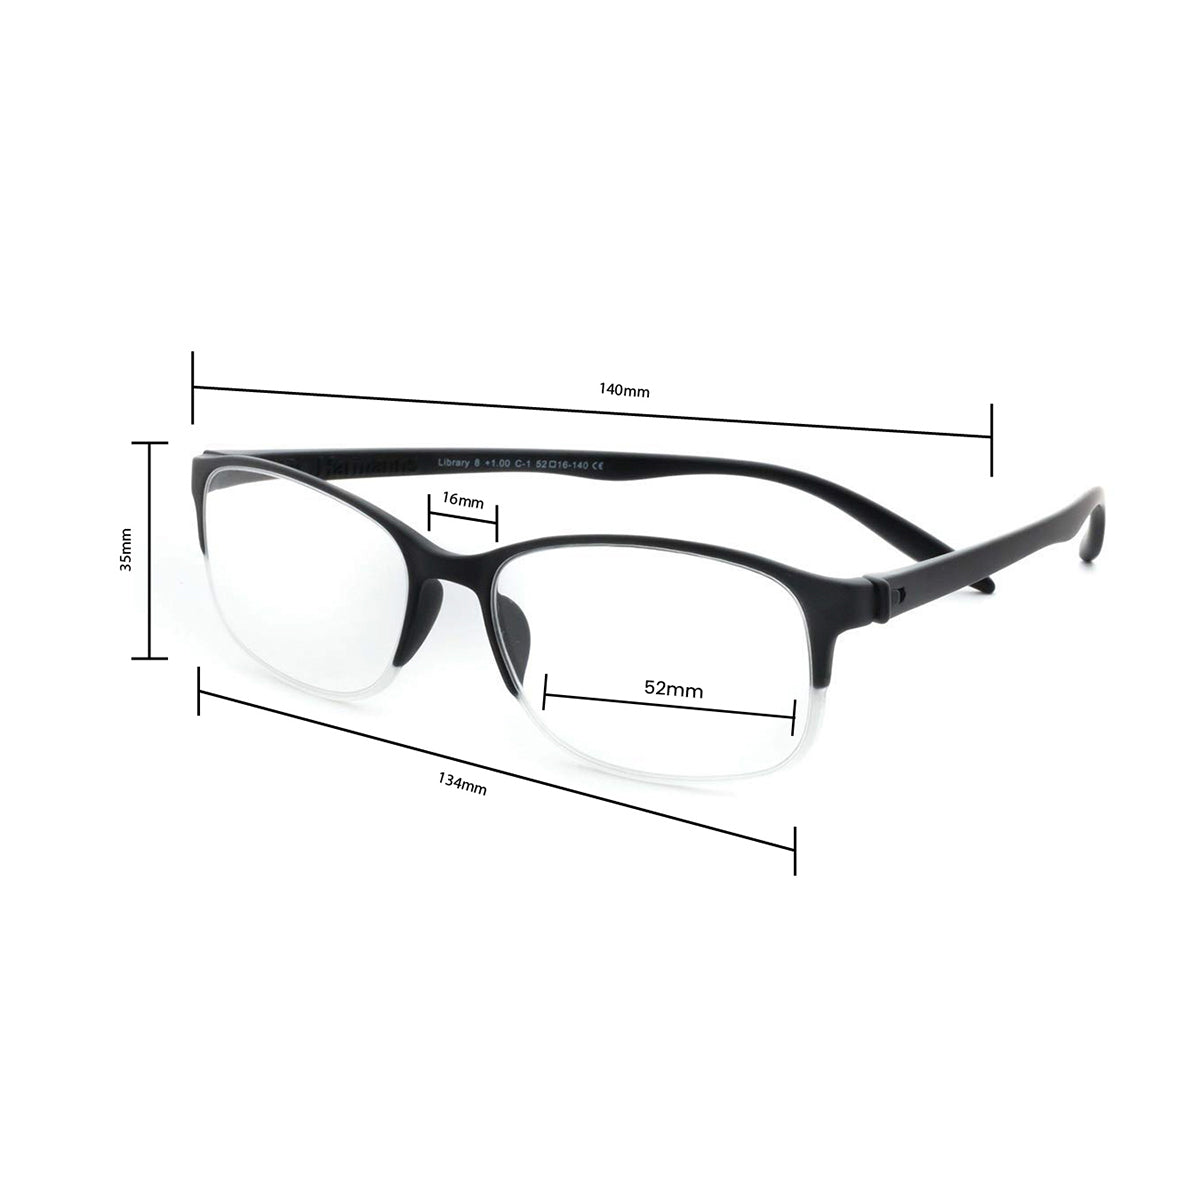 First Lens' Library8 Reading Glasses for comfortable reading